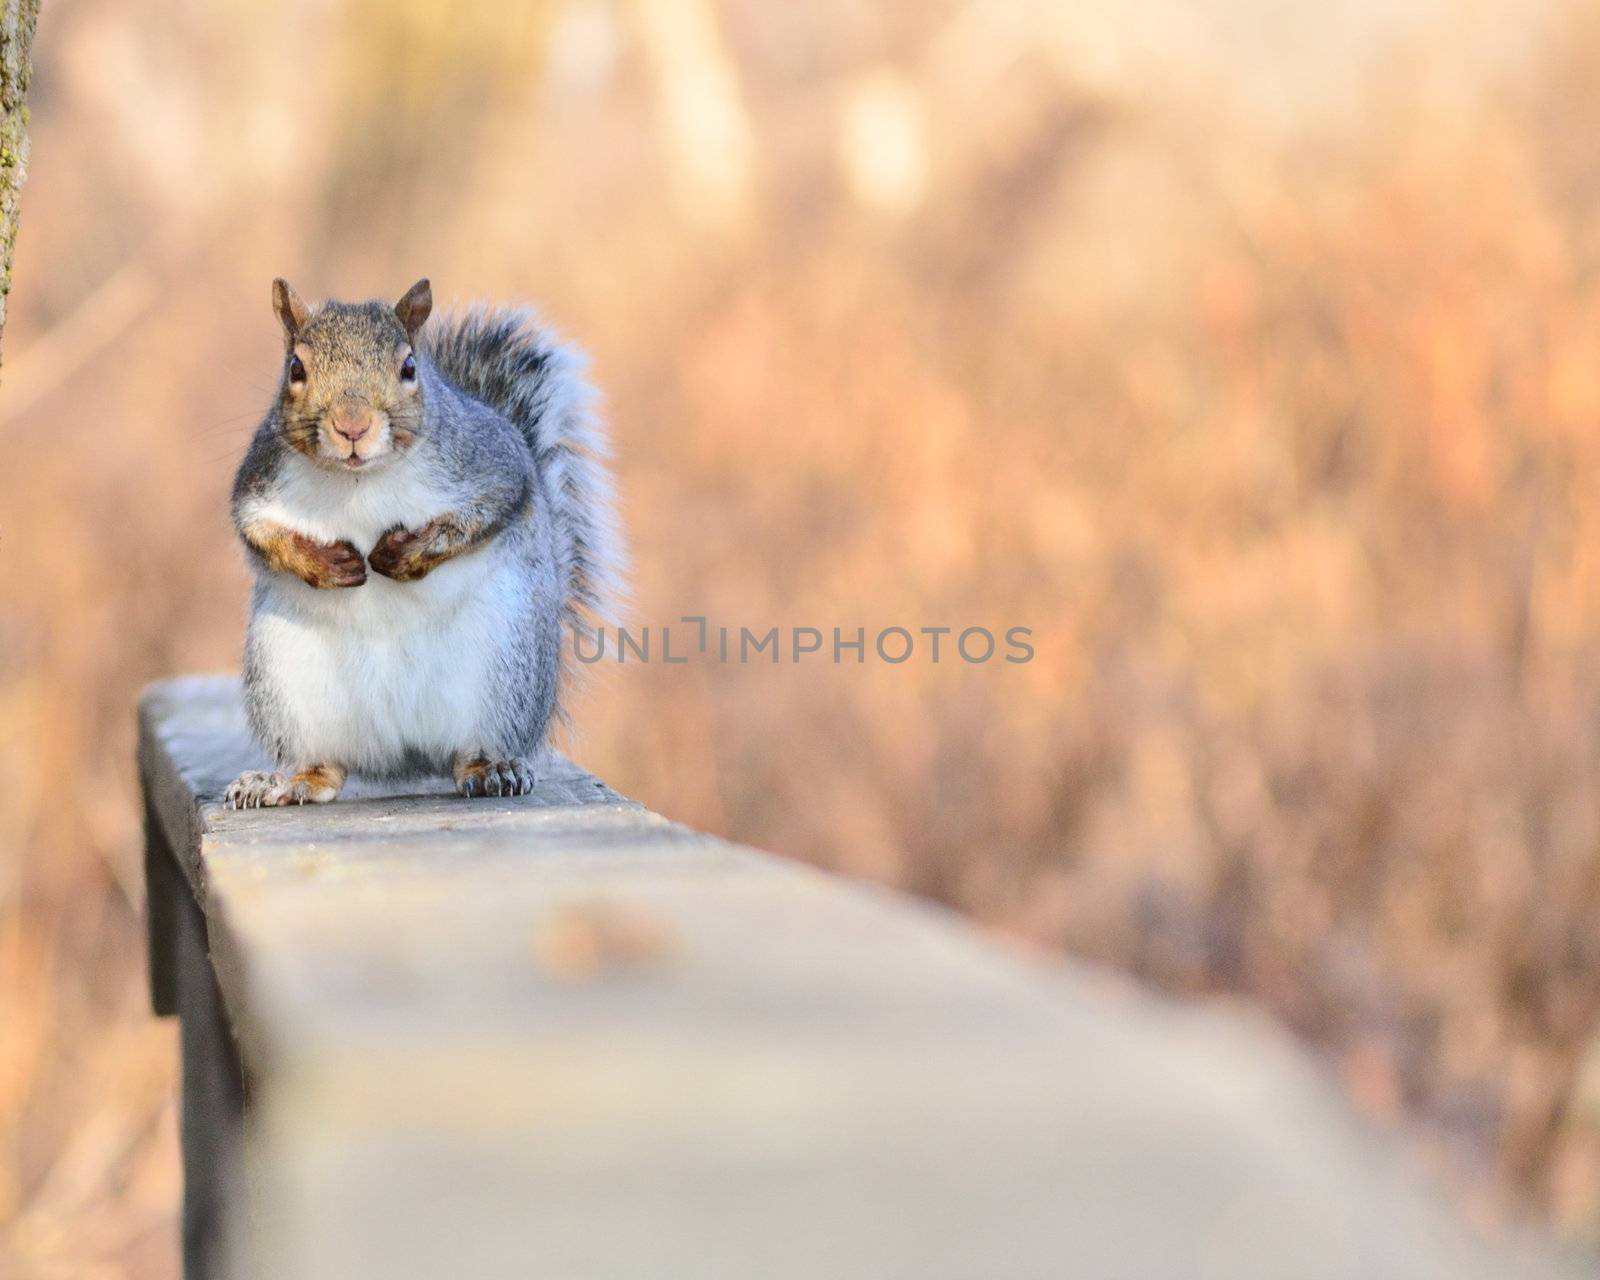 A grey squirrel perched on a fence eating peanuts.